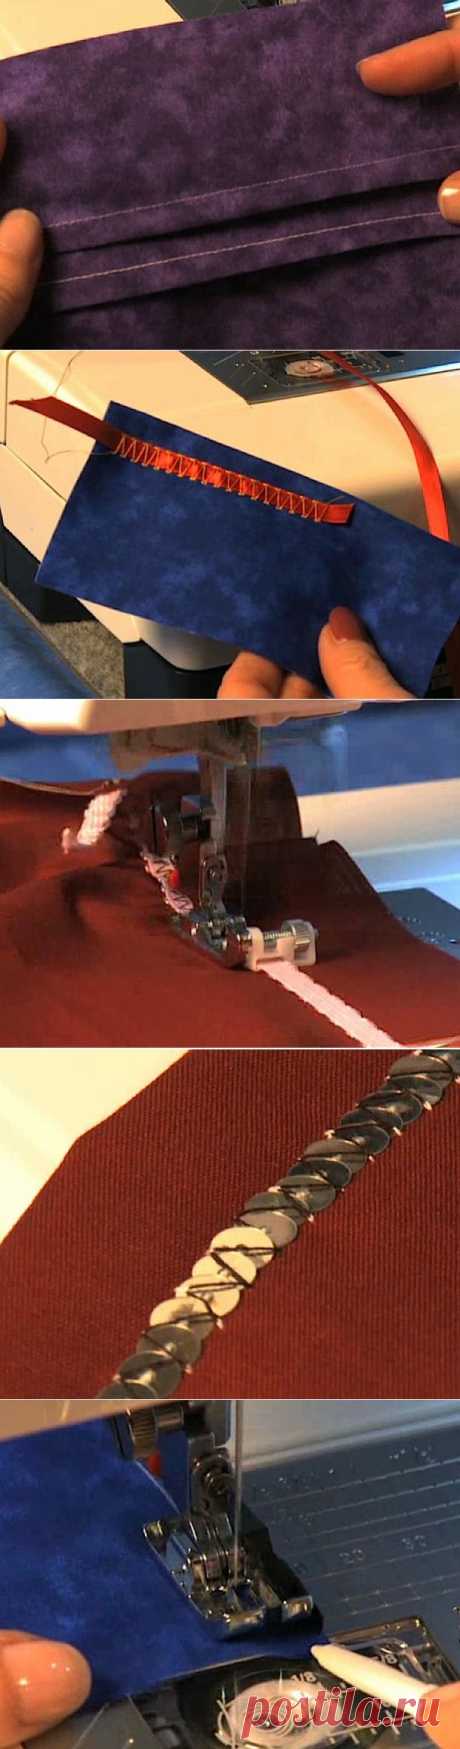 10 brilliant sewing machine tutorials from Janome for National Sewing Machine Day | Craftseller